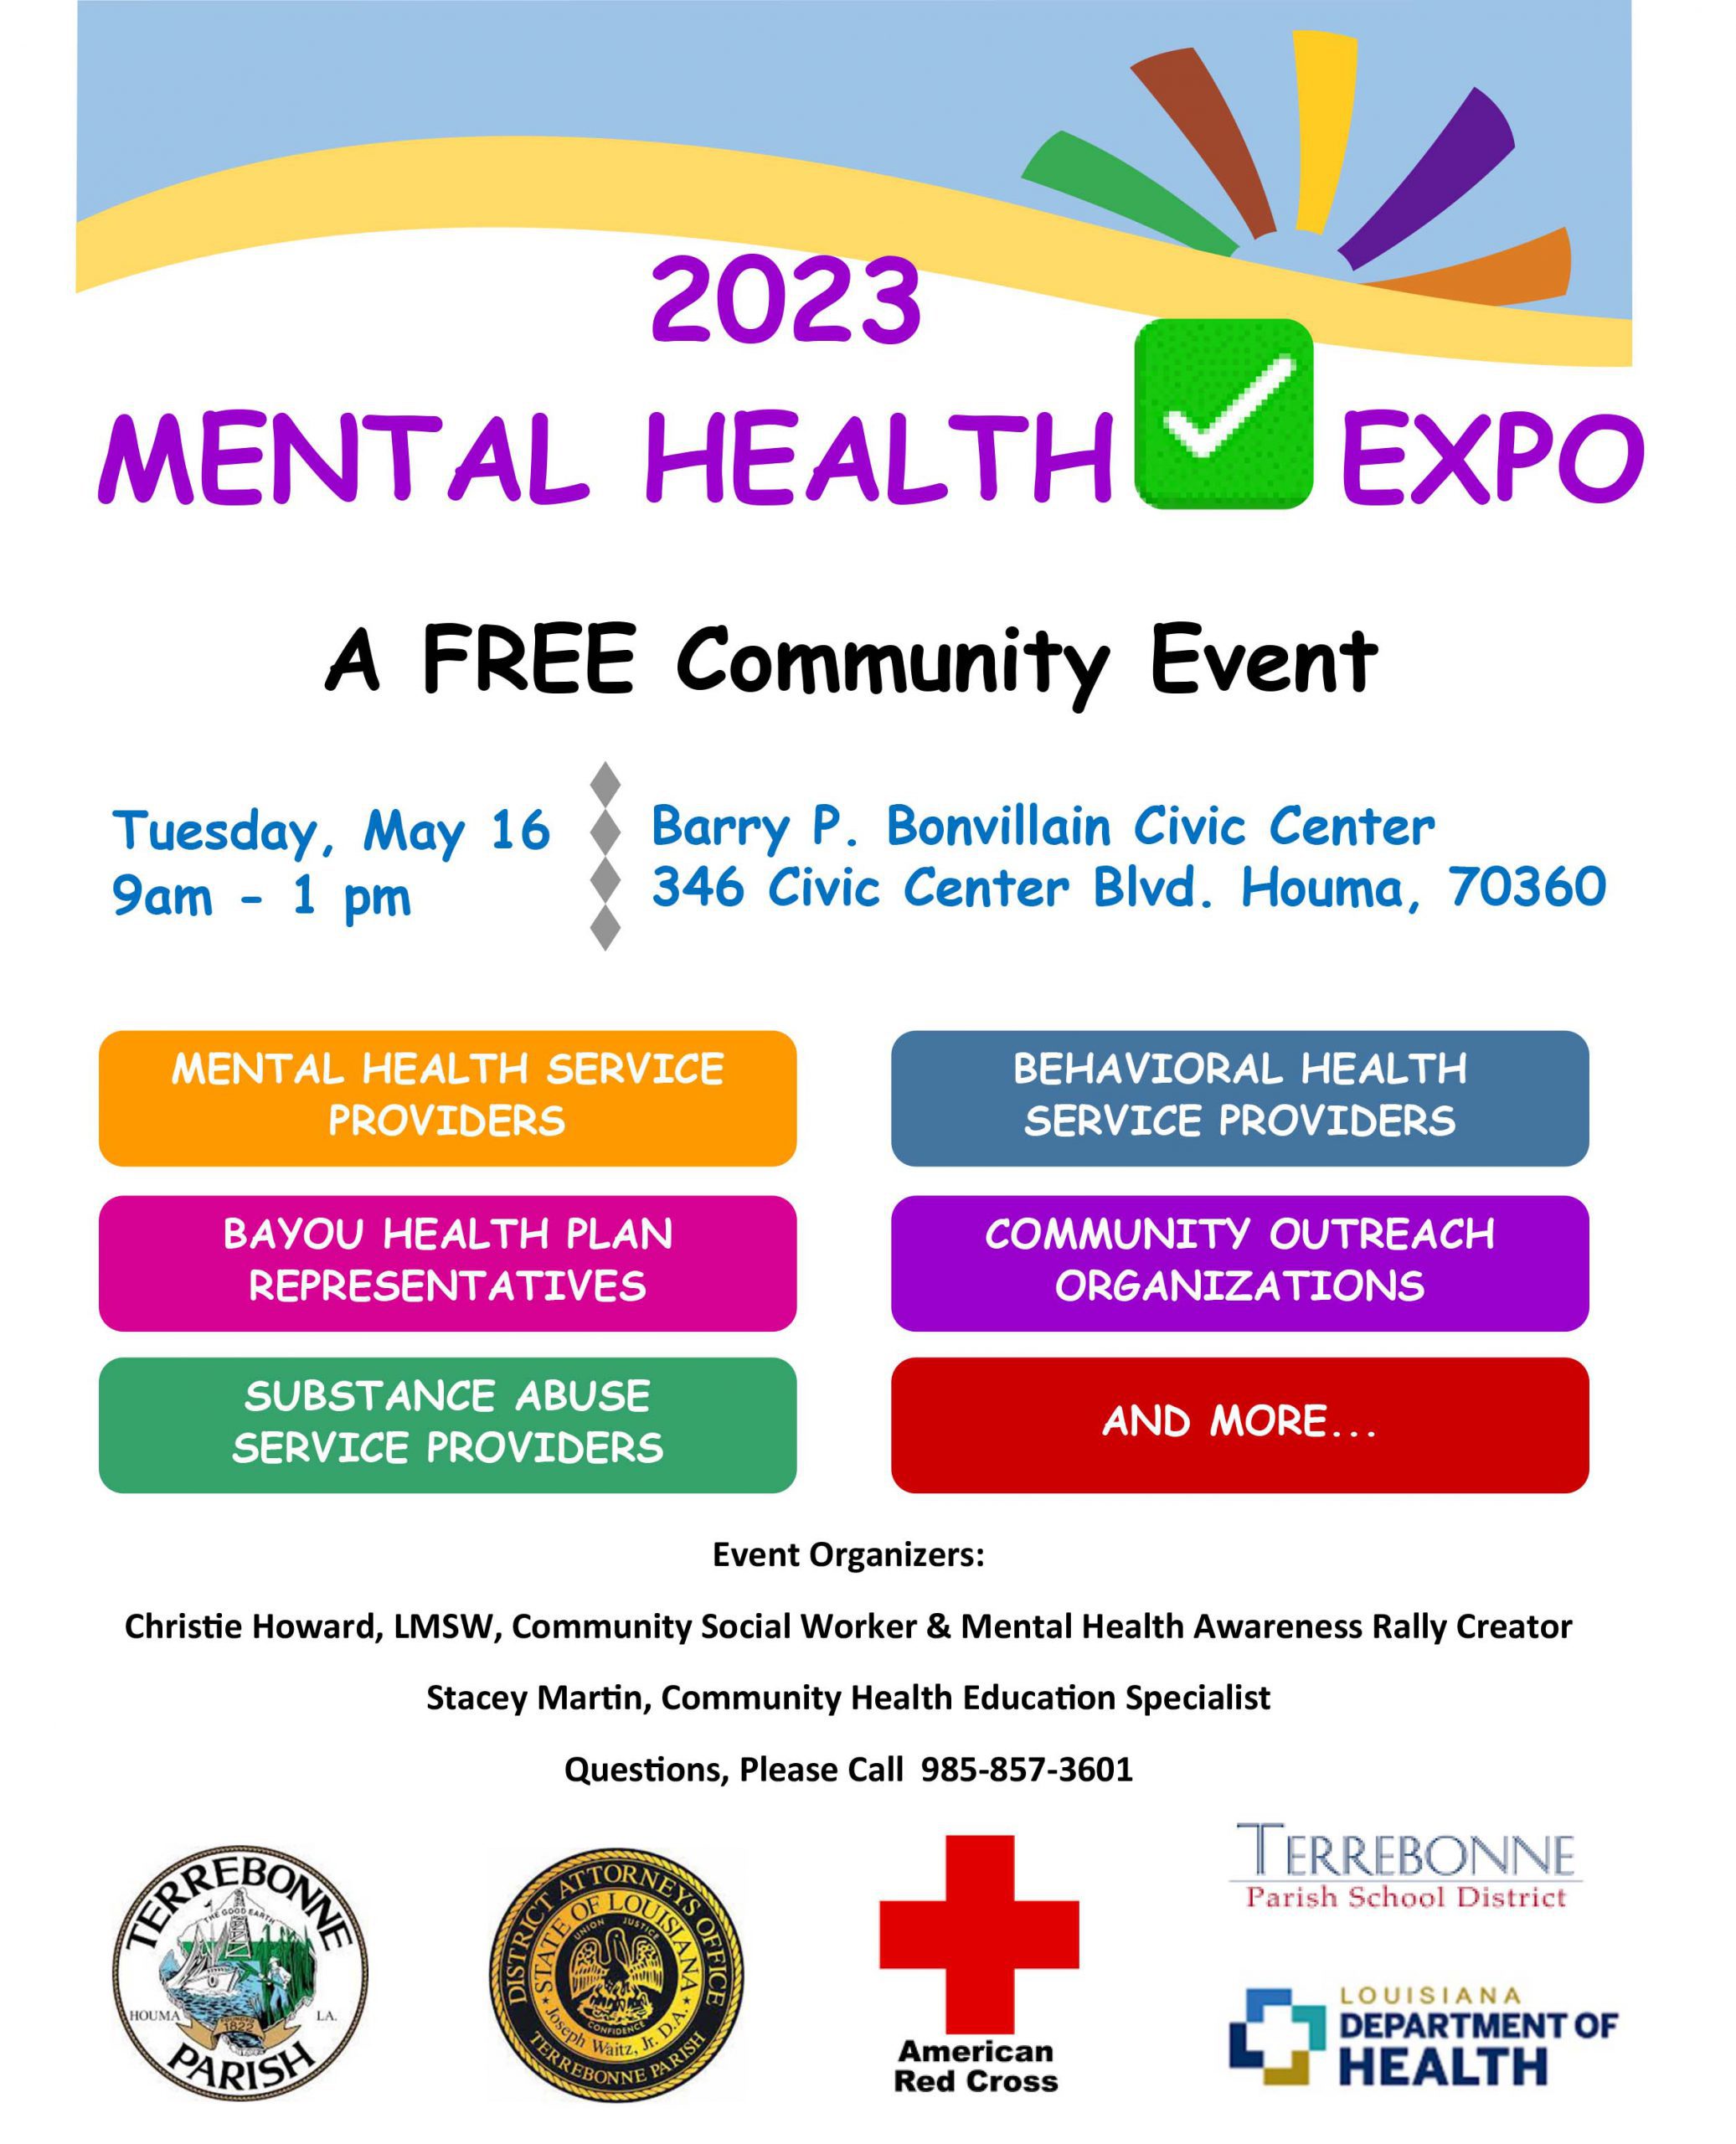 2023 Mental Health Expo - A free community event.